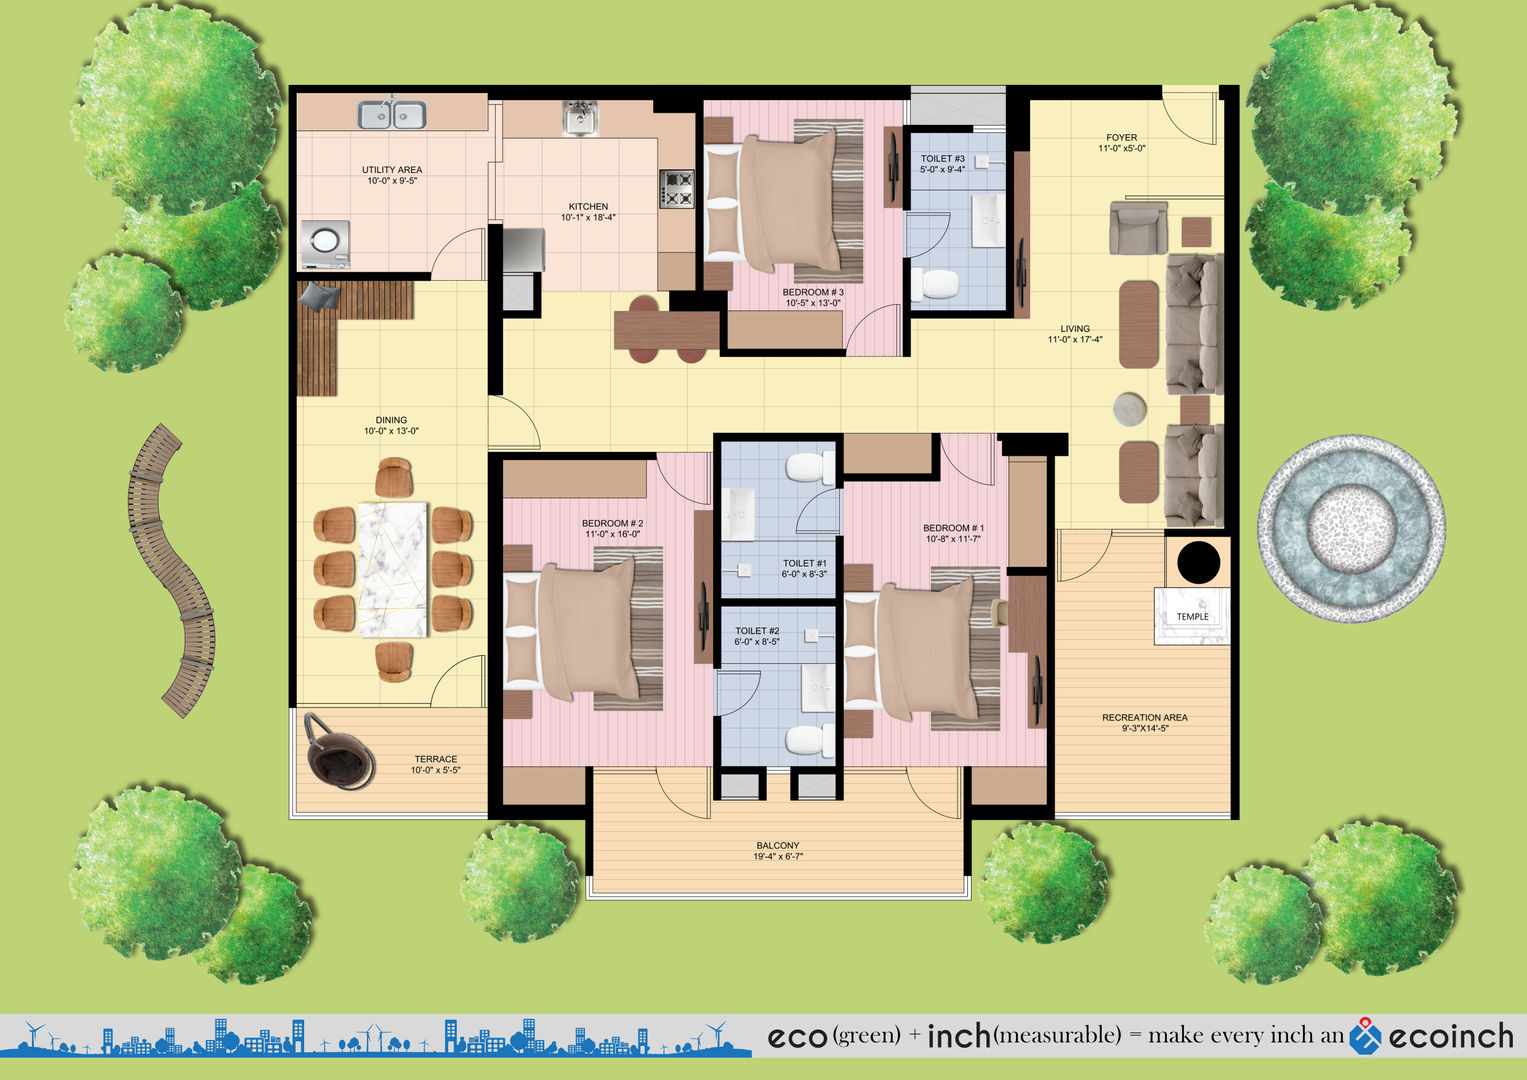 Final Floor Plan Ecoinch Services Private Limited Modern houses